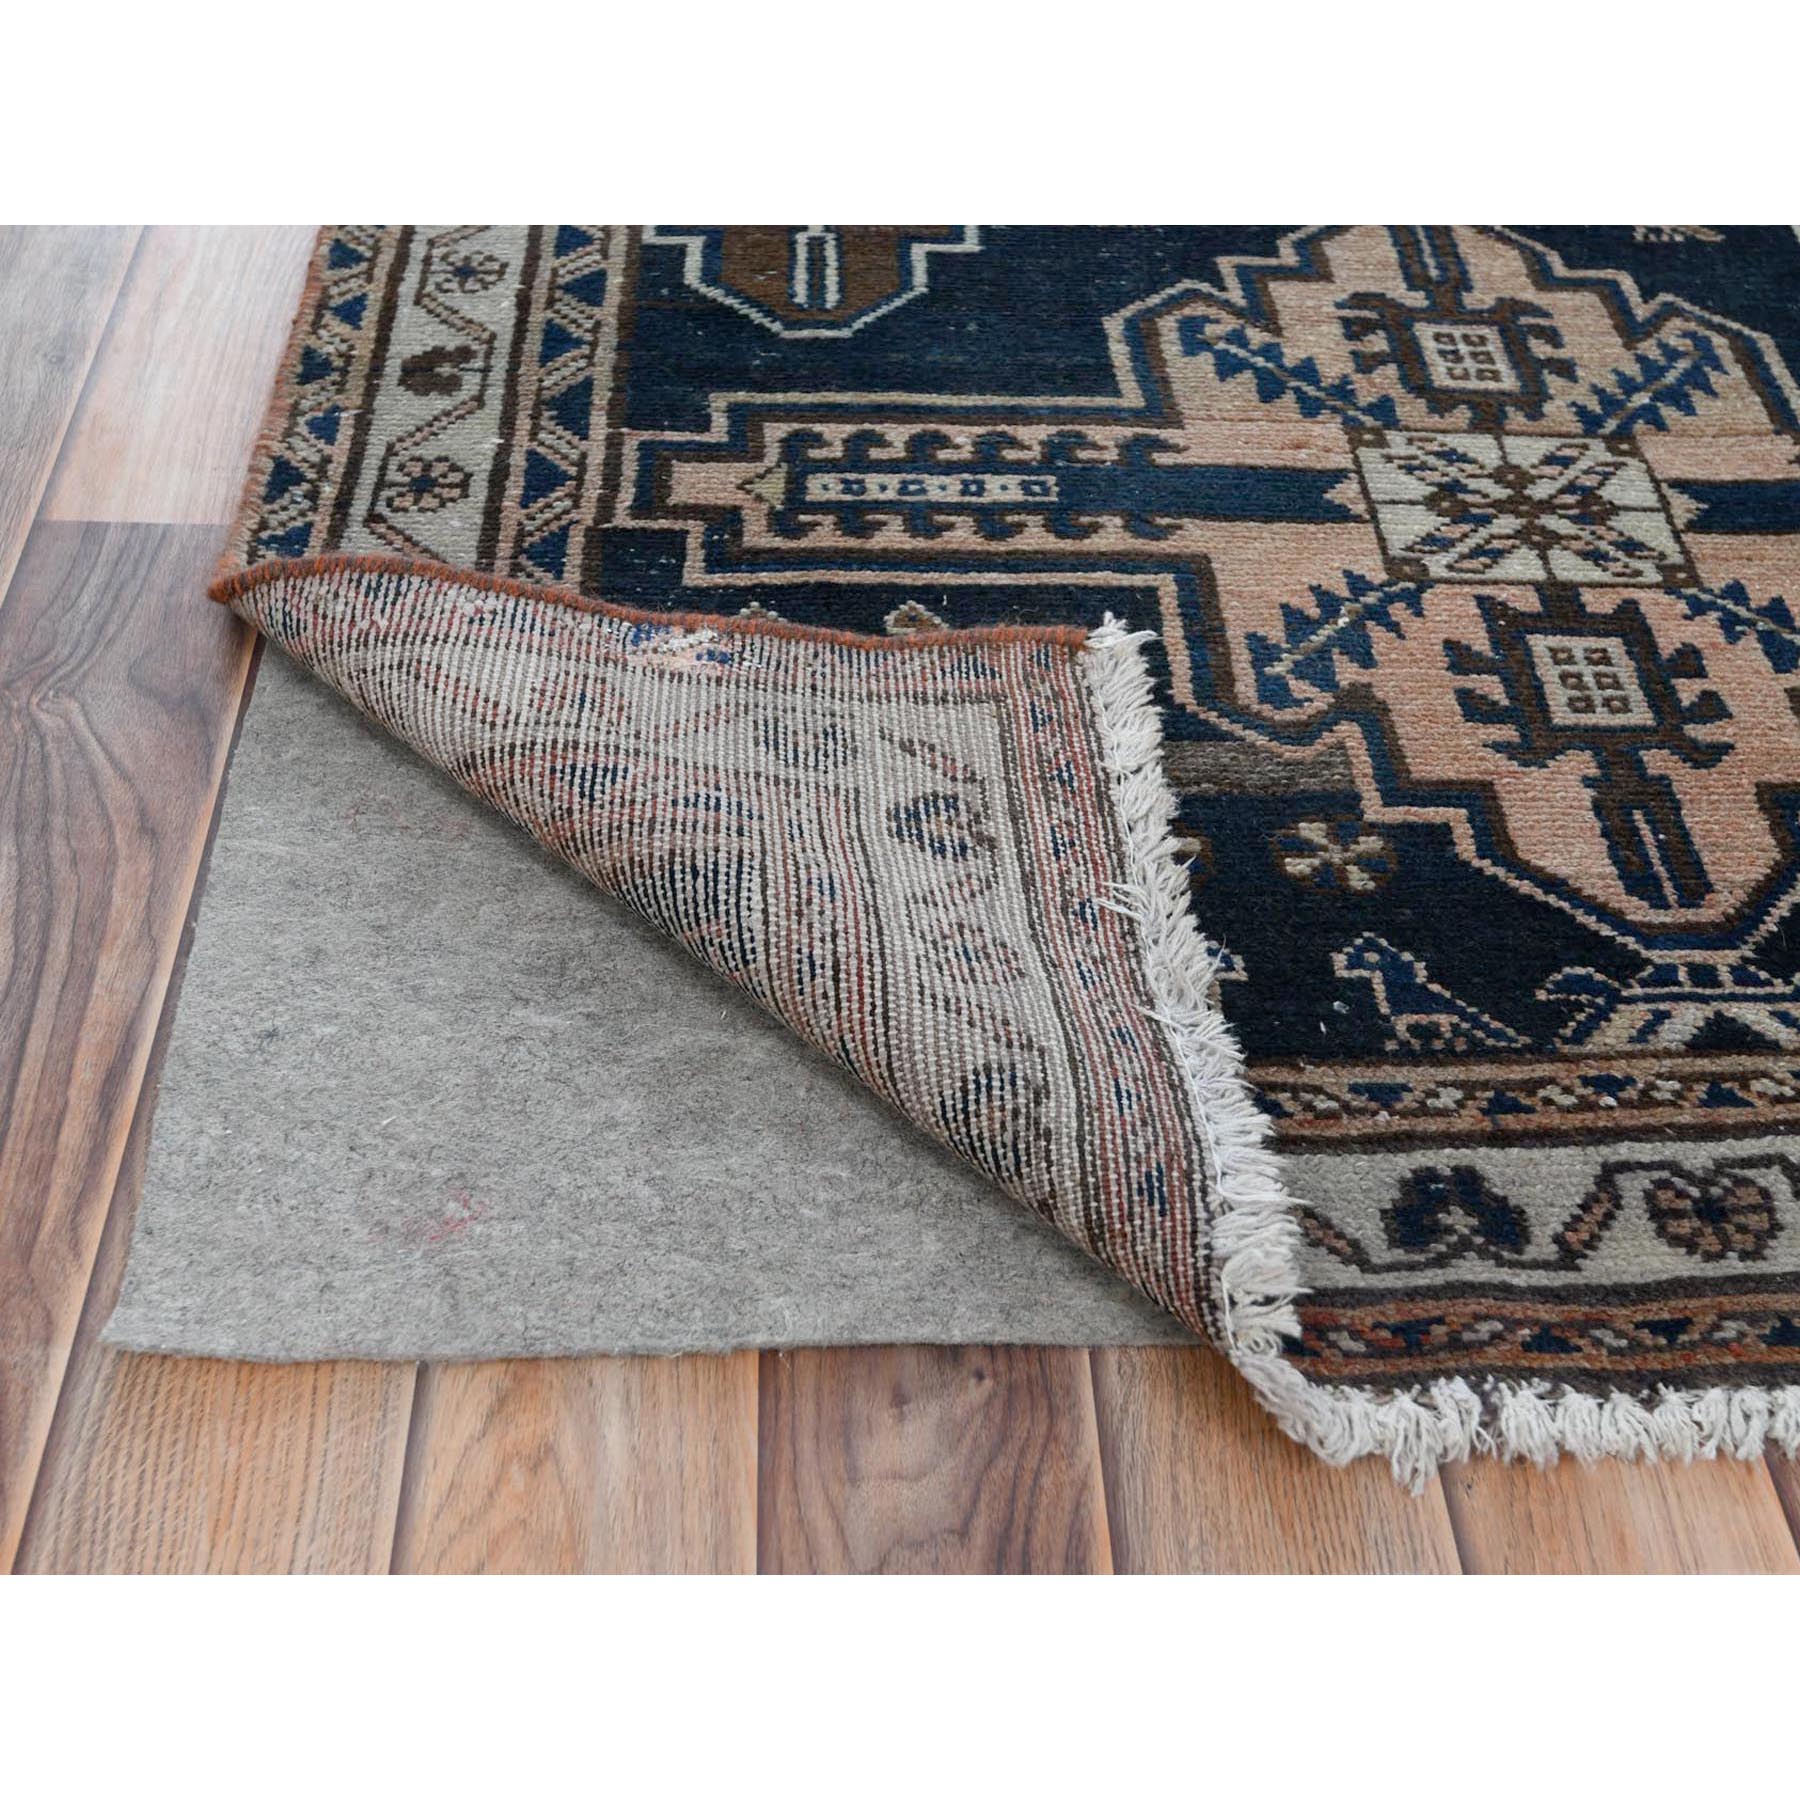 3'5"x9'7" Midnight Blue, Vintage Persian Malayer with Small Bird Figurines, Abrash, Distressed, Sheared Low Hand Woven Pure Wool Wide Runner Oriental Rug 